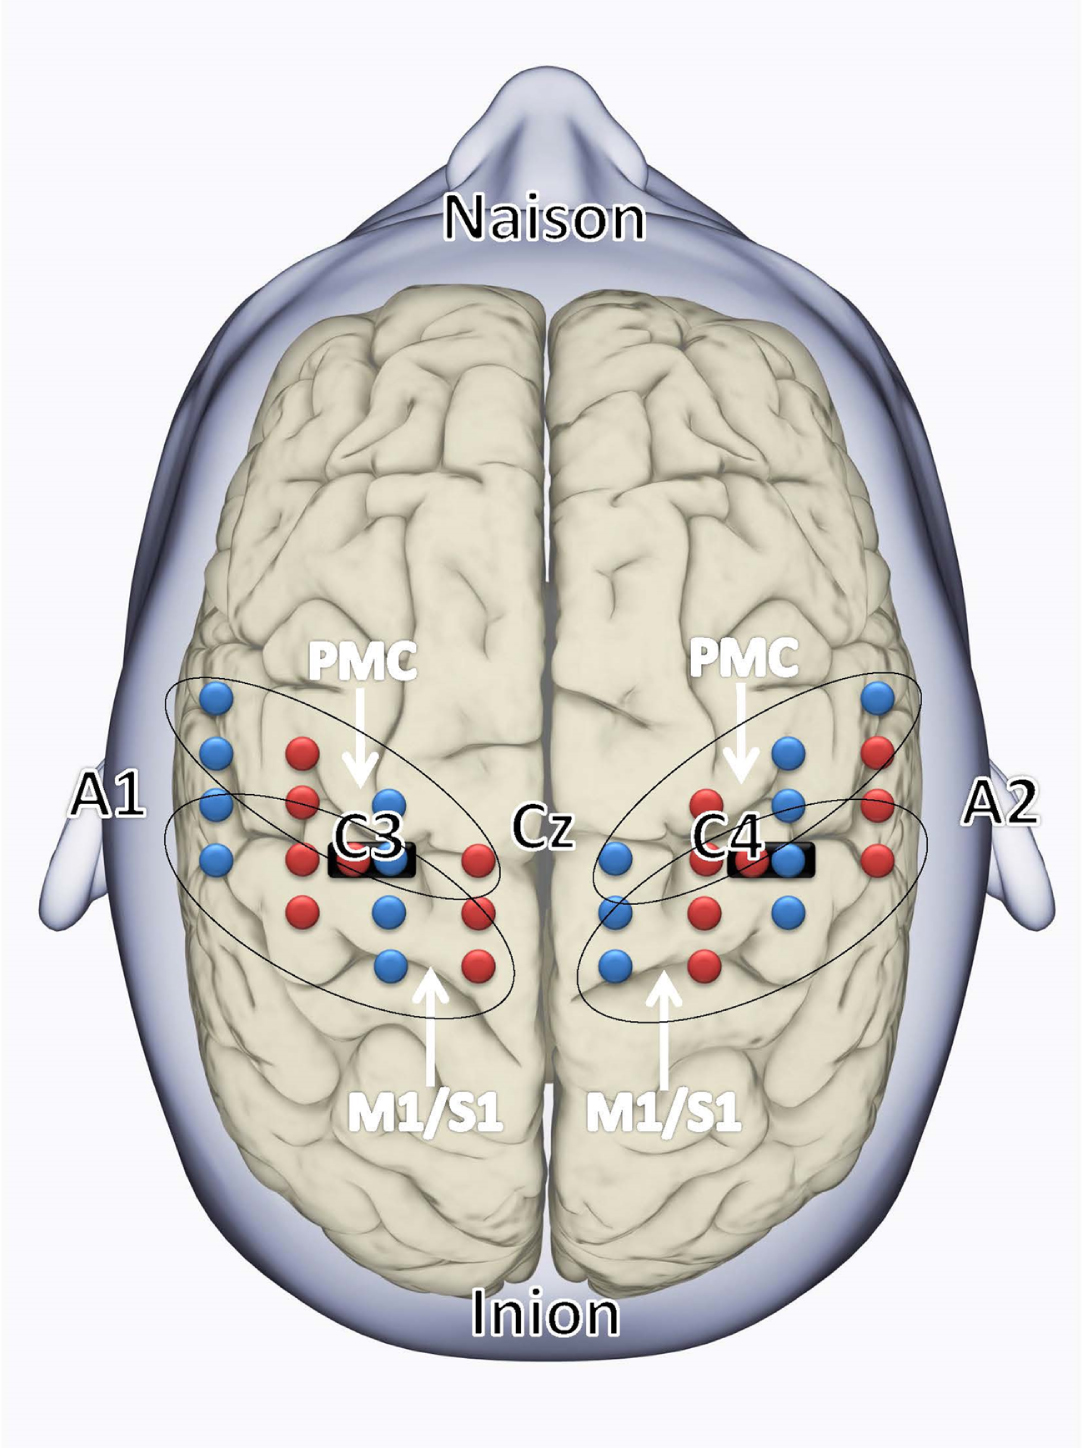 The fNIRS probe set was positioned over the motor areas. Black ovals indicate the covered areas of the sensory-motor regions of the left and right hemispheres: M1/S1 (primary motor/sensory cortex) and premotor cortex (PMC). The fNIRS array consisted of 16 sources (red) and 32 detectors (blue) with the short distance source-detector pairs depicted with black markings. The EEG International 10/20 system, including Cz, naison, inion, A1, A2, C3, and C4 locations are indicated.